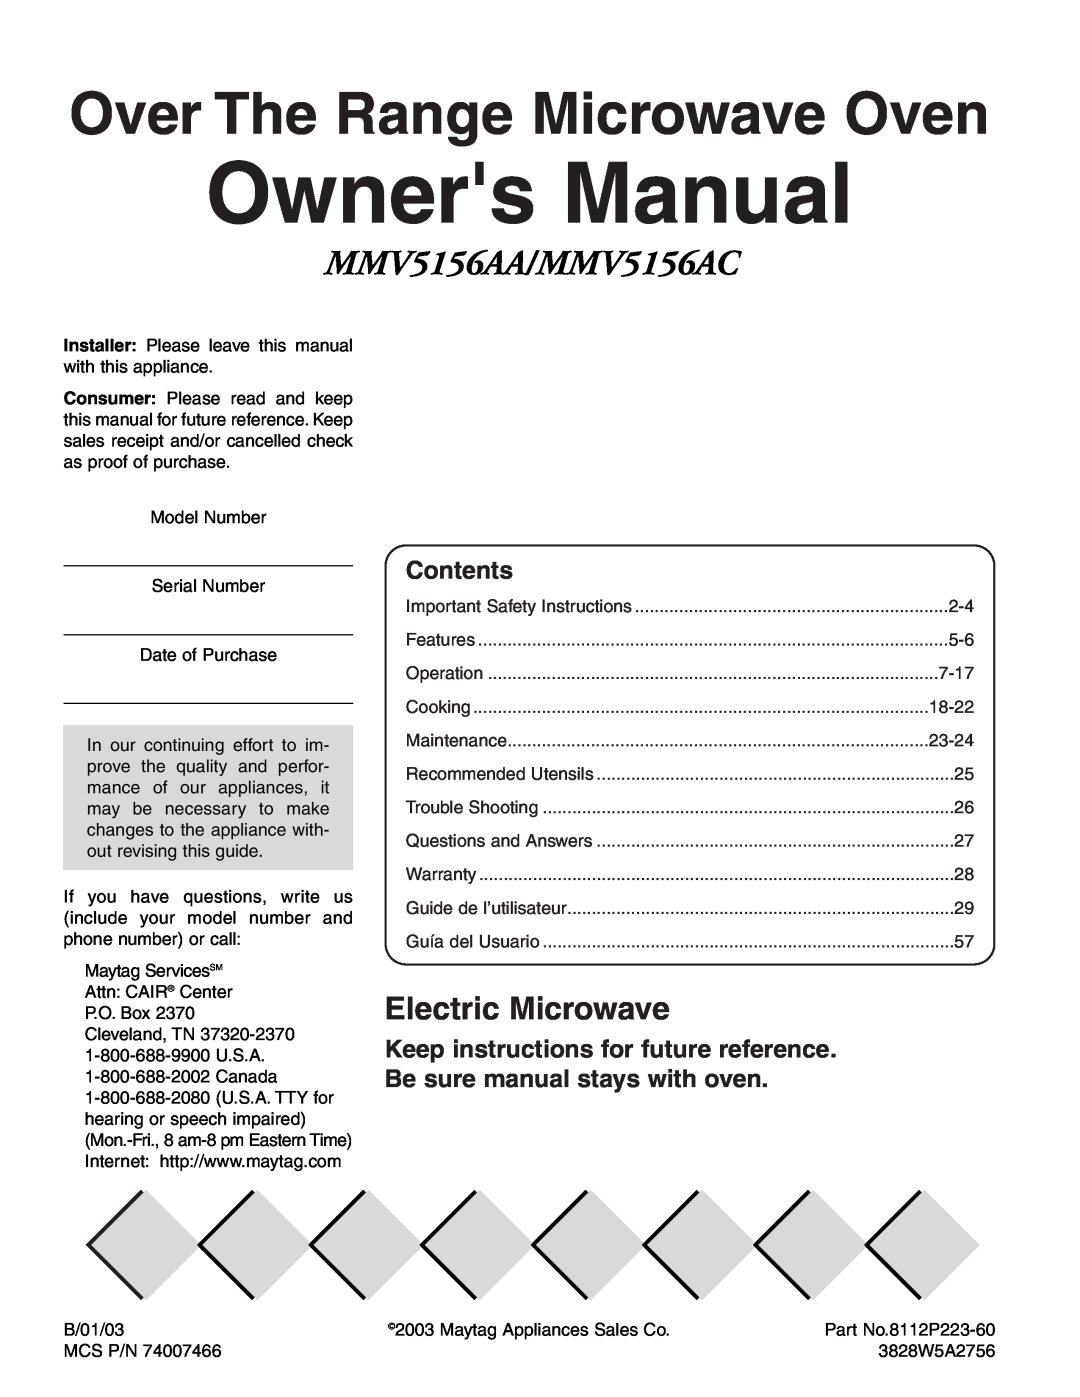 Maytag MMV51566AA/MMV5156AC owner manual Owners Manual, Over The Range Microwave Oven, MMV5156AA/MMV5156AC, Contents 